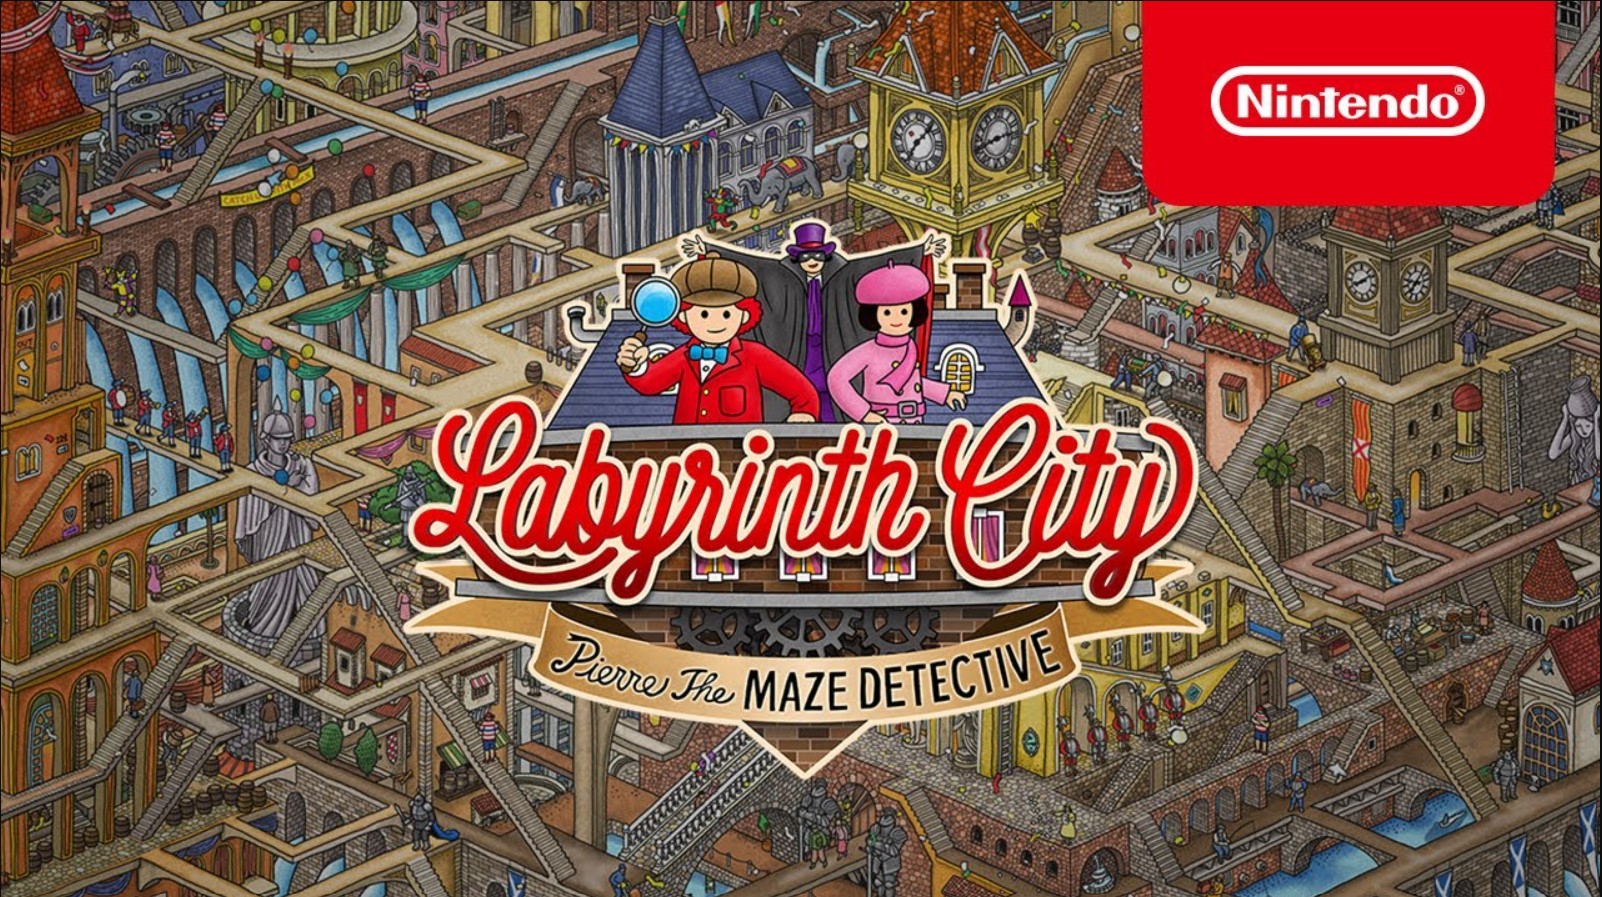 Labyrinth City Pierre the Maze Detective Pc Full Game With Crack Free Download